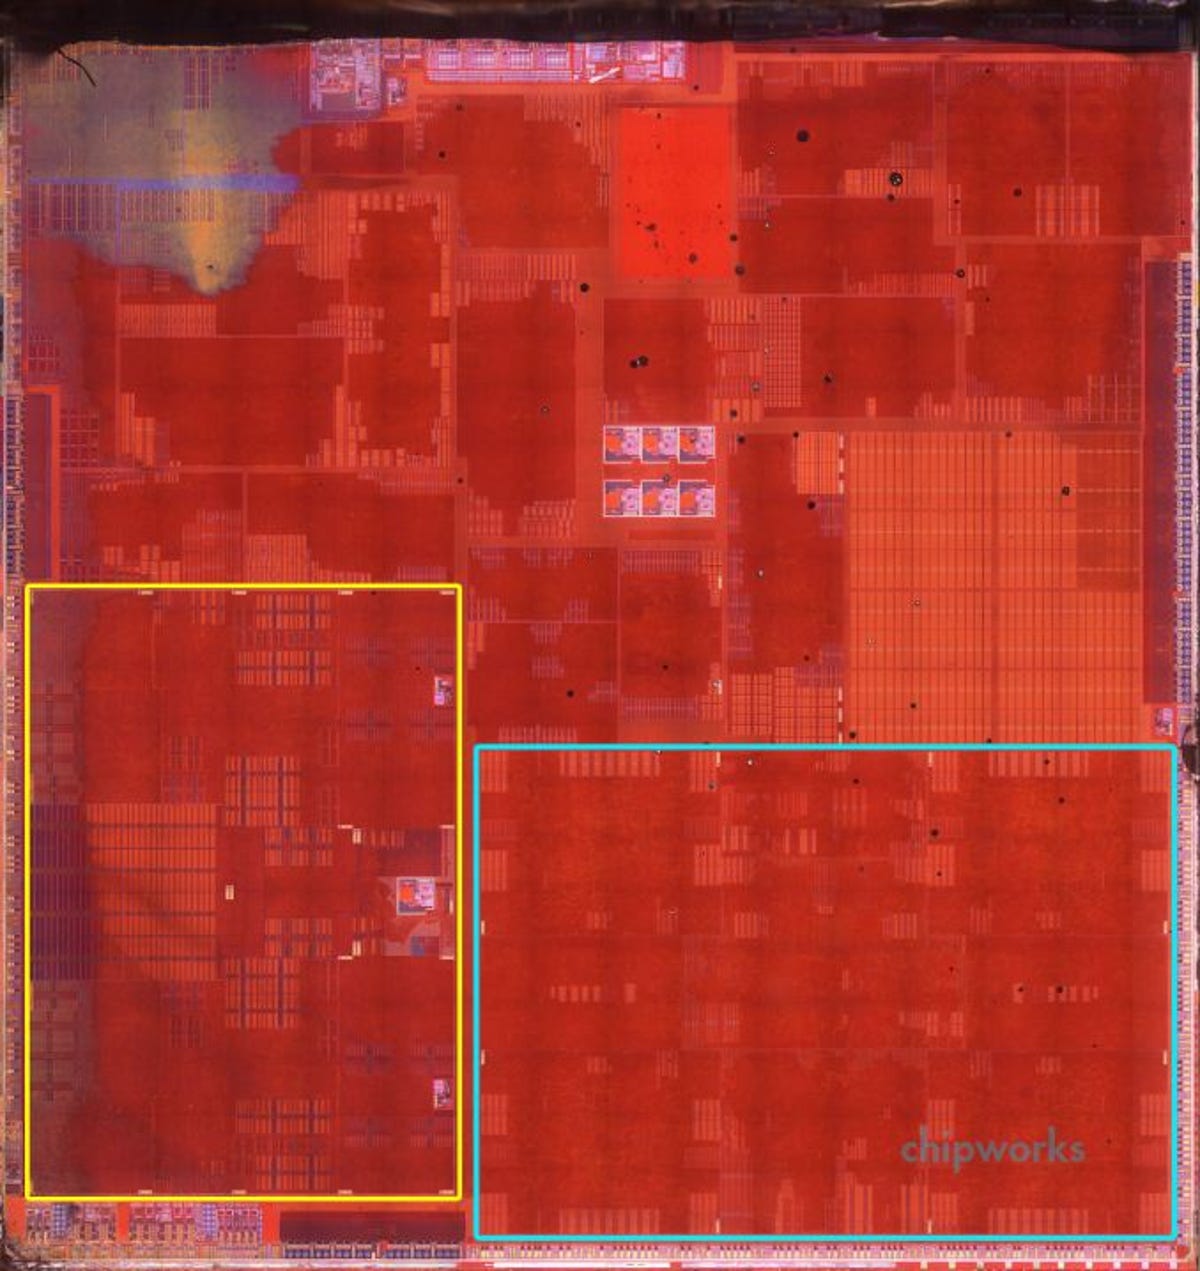 Die photo of A7: Anandtech speculates that blocks within the yellow border comprise the dual-core Apple A7 CPU.